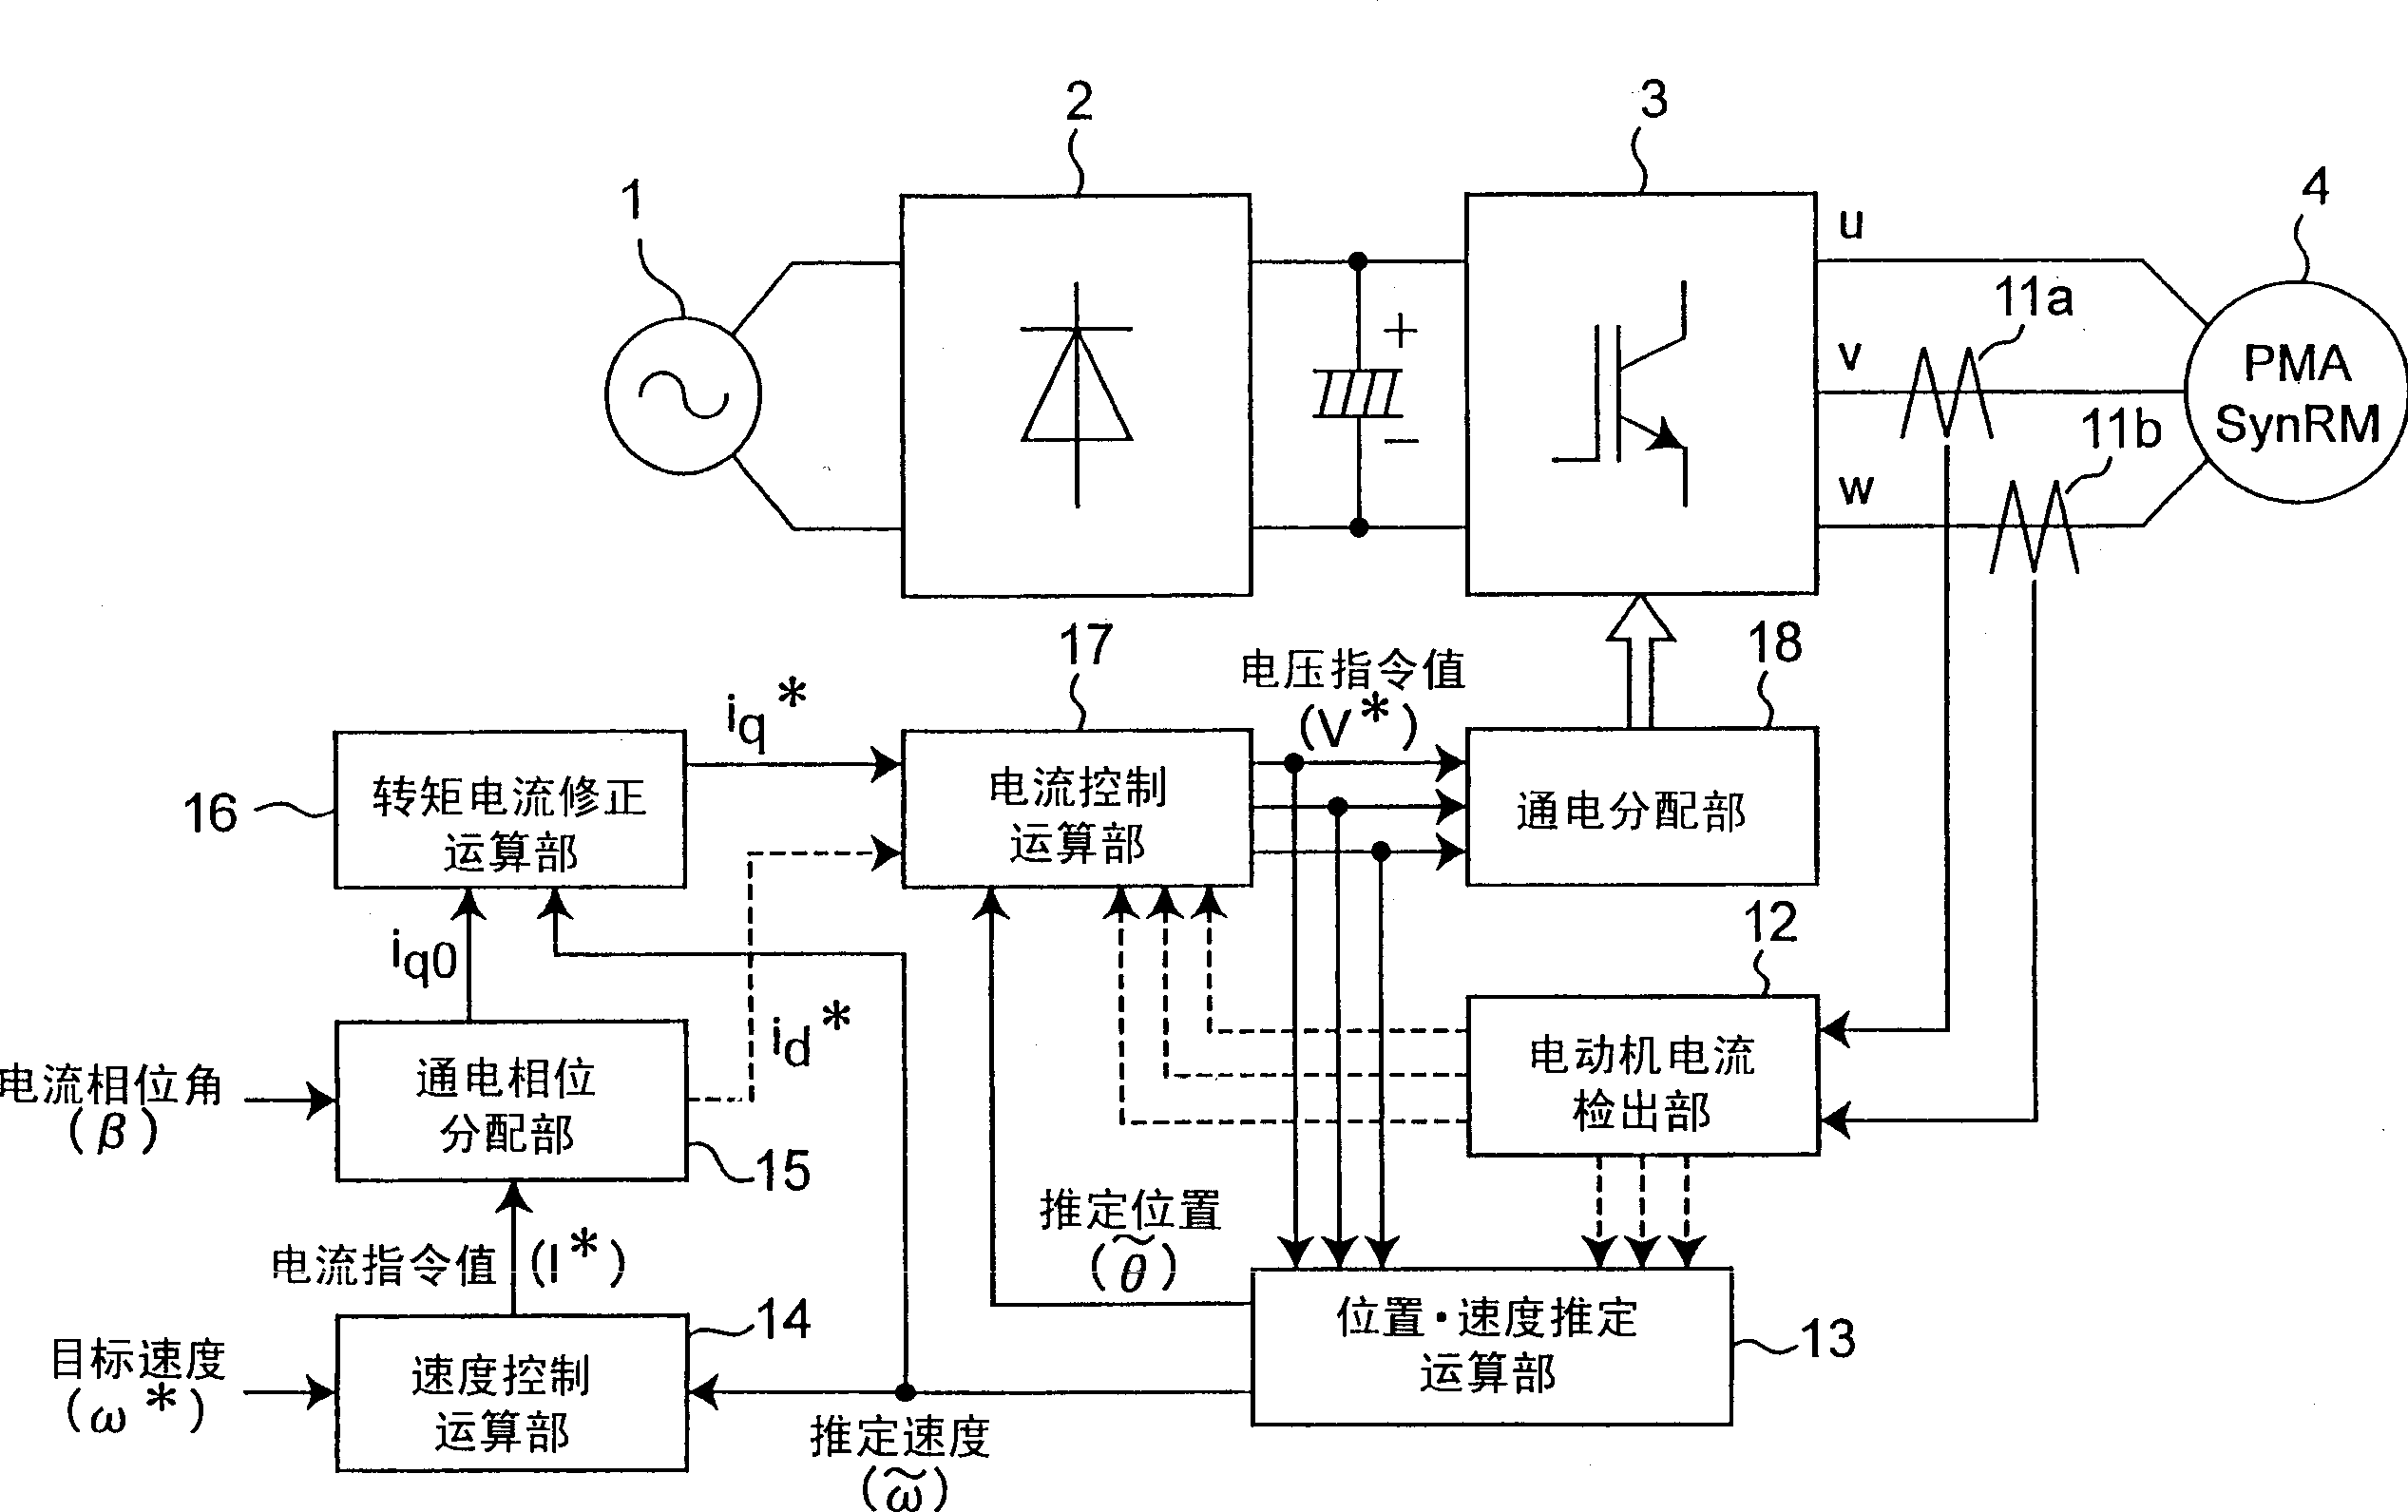 Synchronuos reluctance motor control device